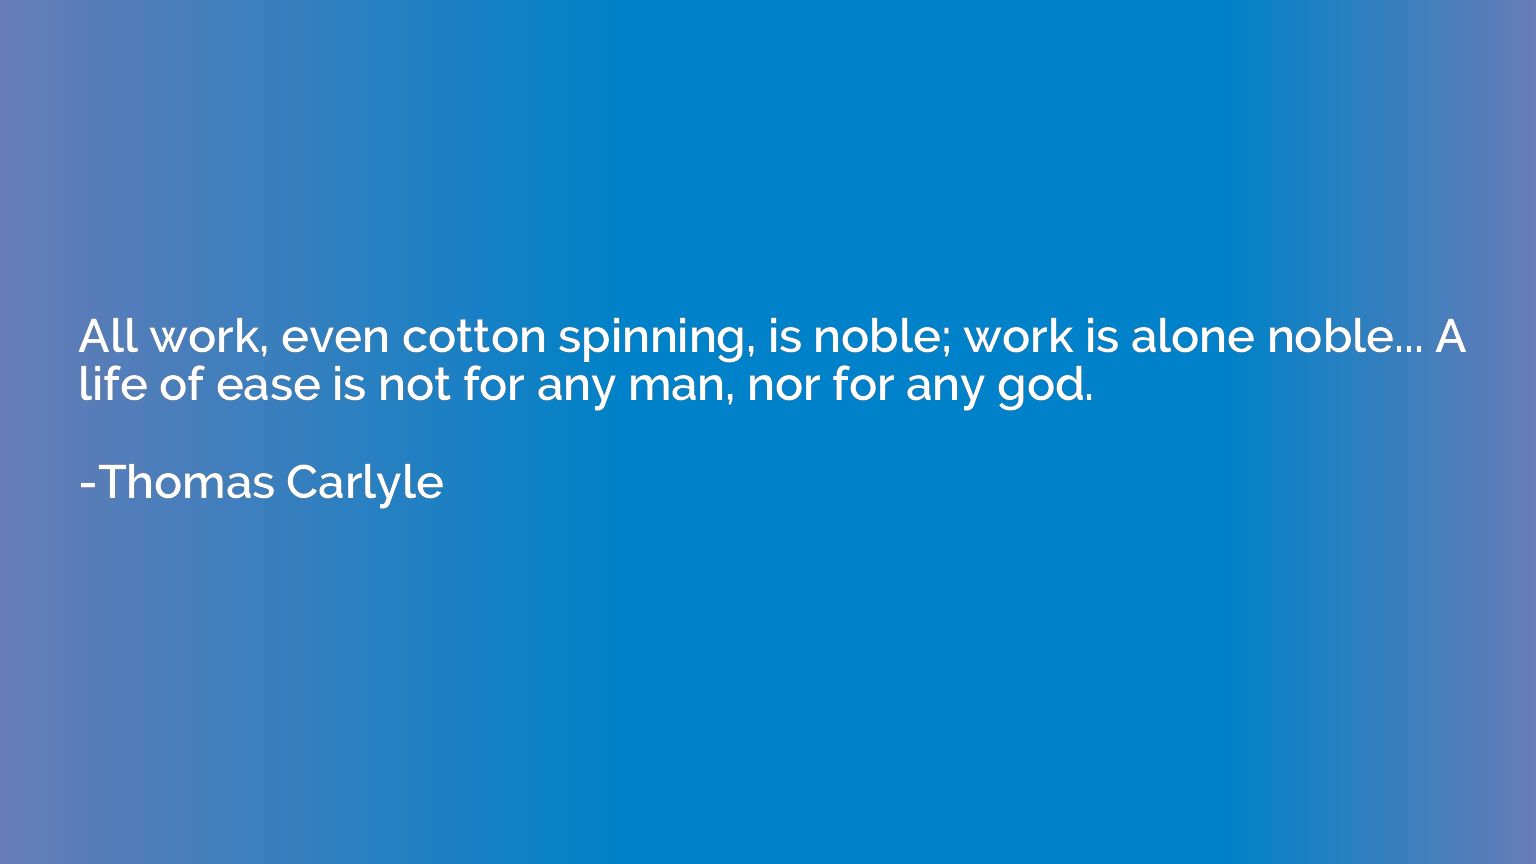 All work, even cotton spinning, is noble; work is alone nobl